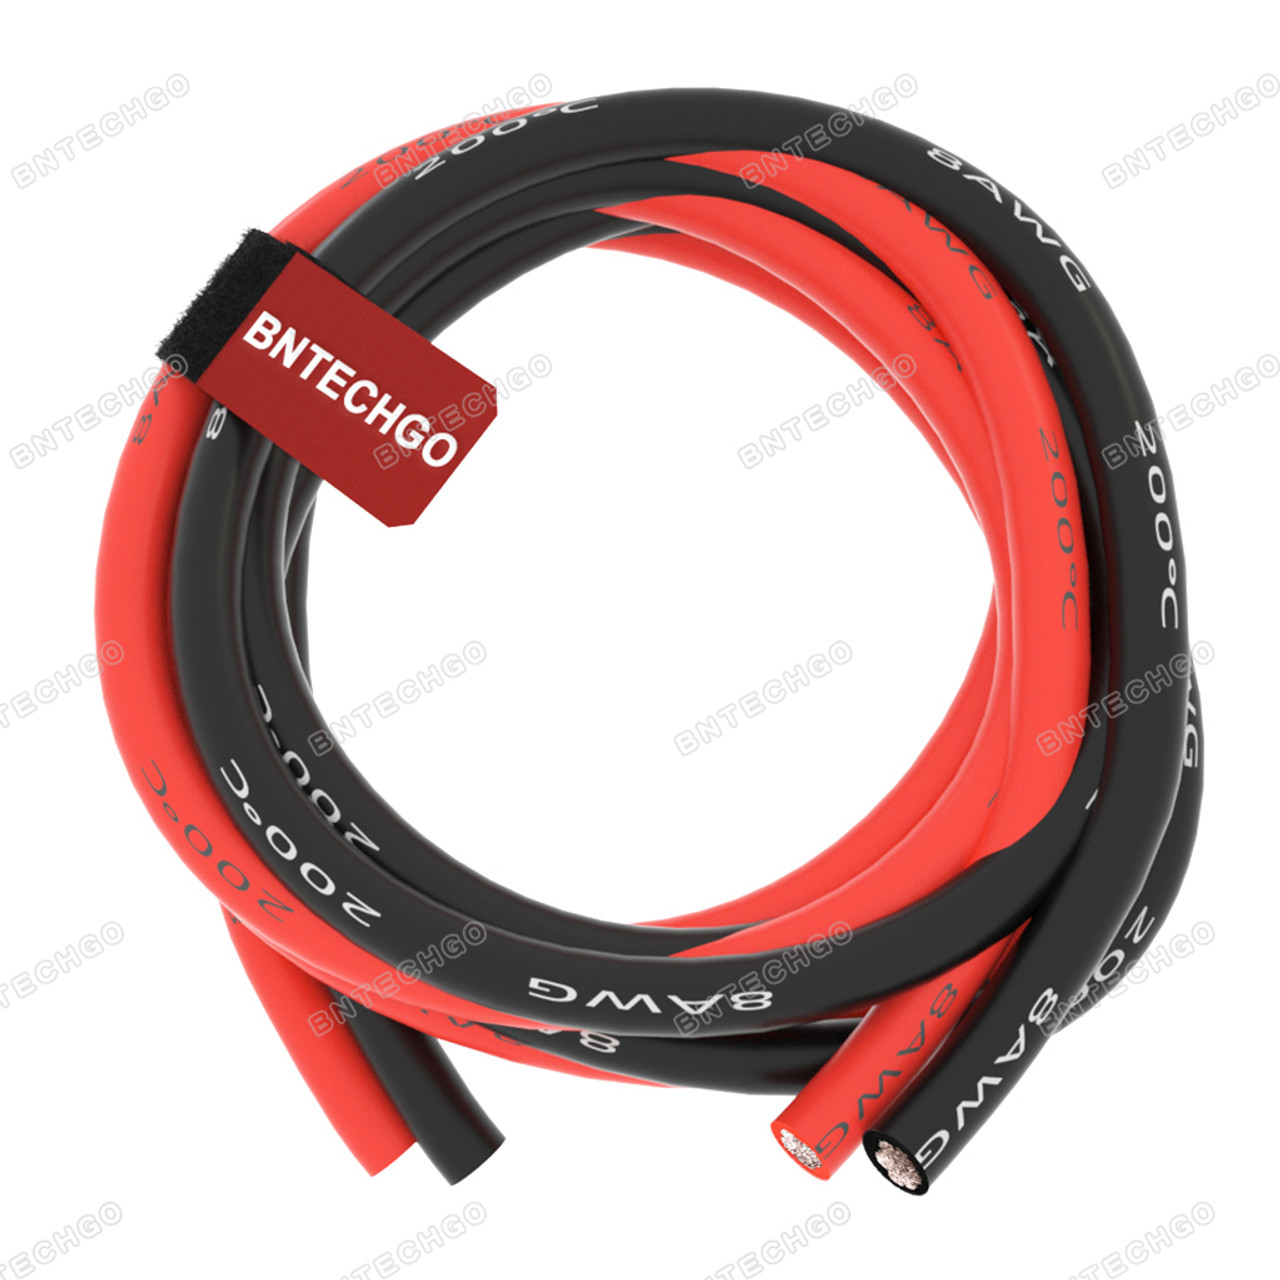 BNTECHGO 8 Gauge Flexible 2 Conductor Parallel Silicone Wire Red Black High  Resistant 200 deg C 600V for Single Color LED Strip Extension Cable Cord